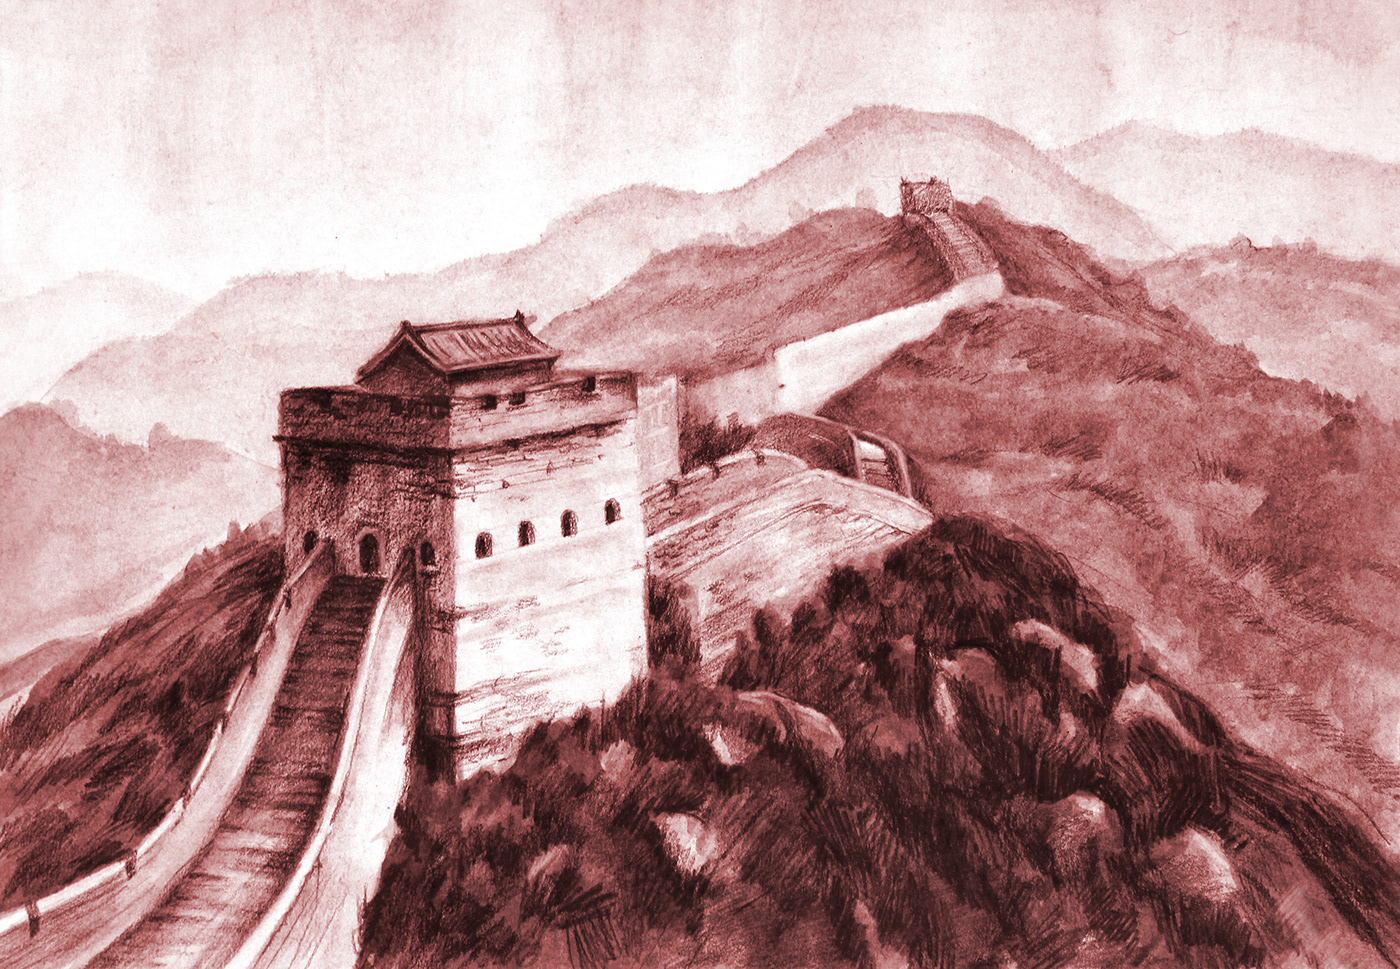 Ancient china chinese Landscape architecture graphics Nature mountains Great Wall of China sepia tone